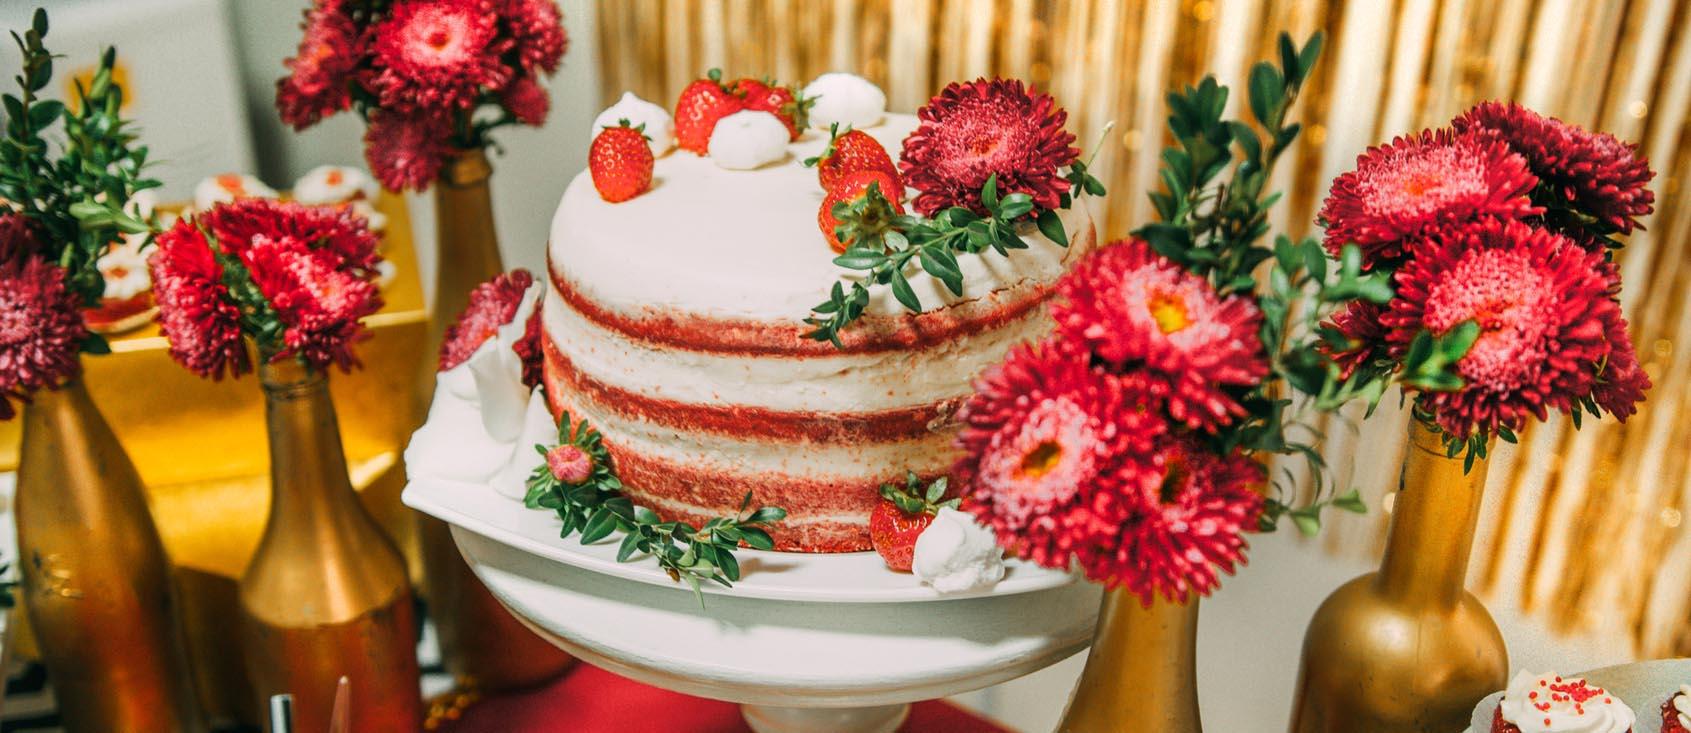 Spring wedding cakes featured image